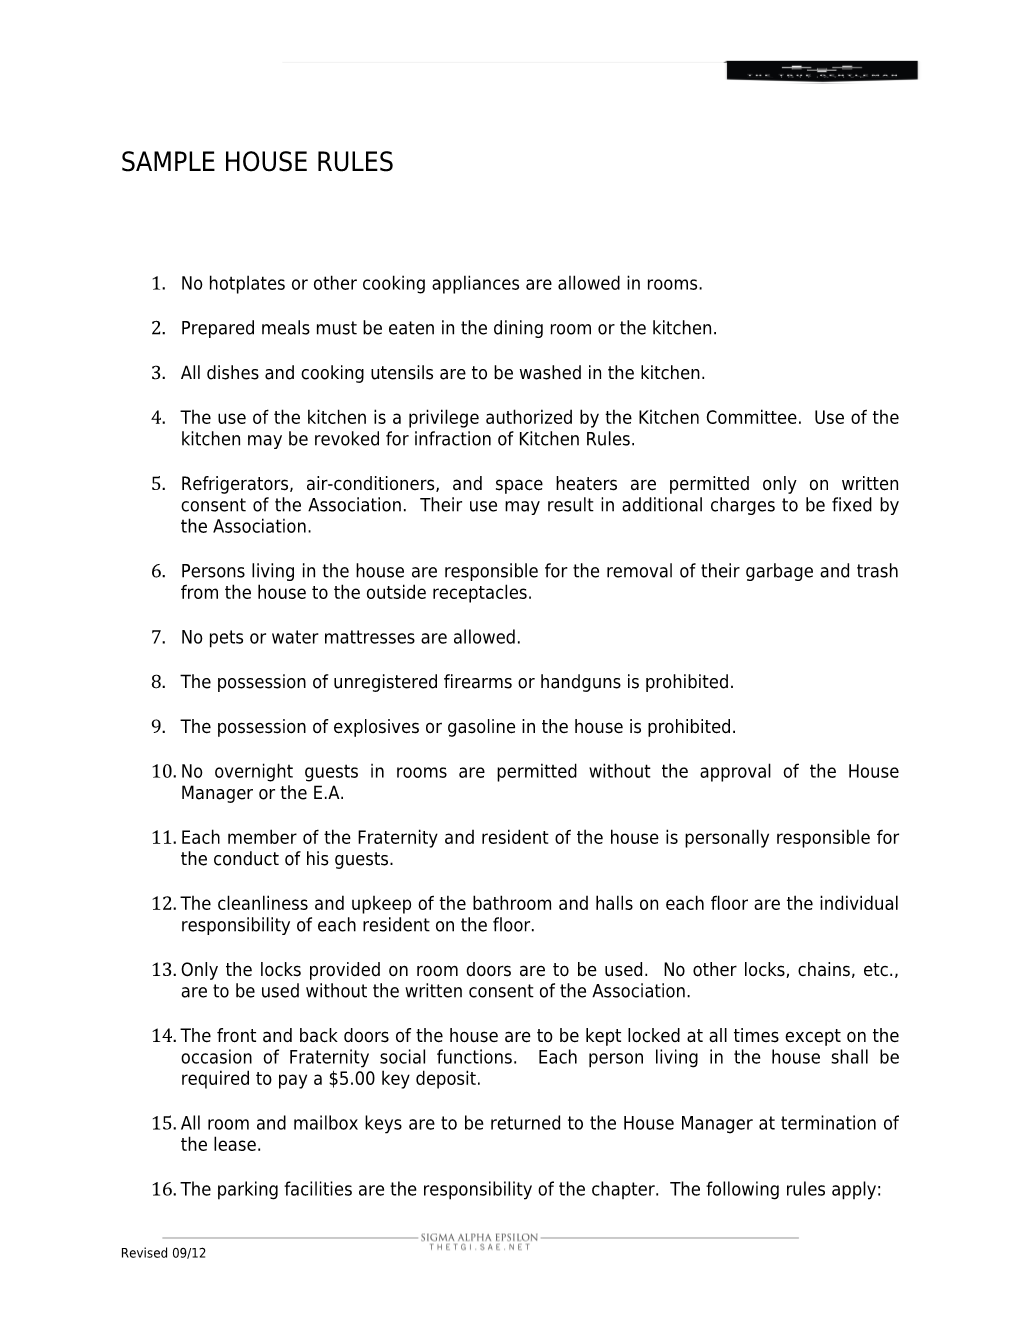 Sample House Rules